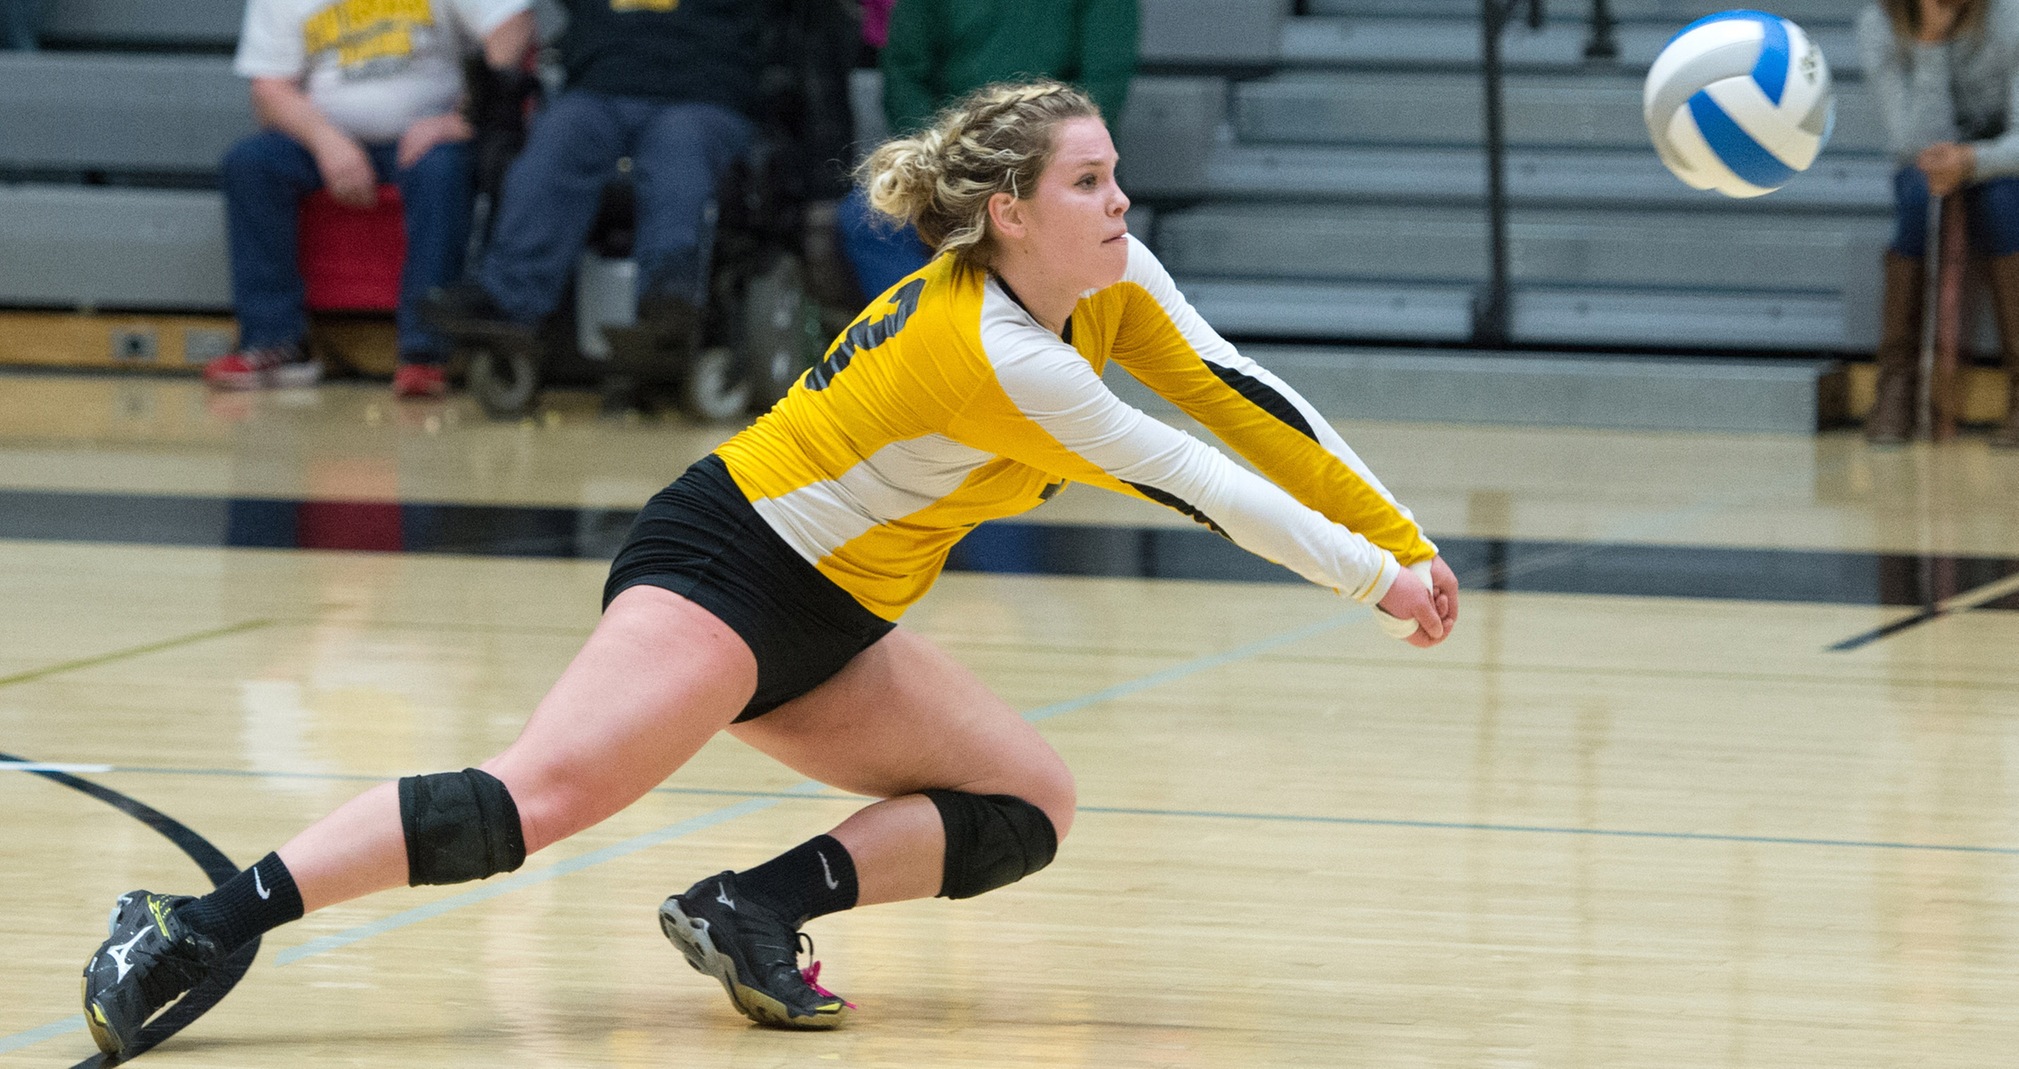 Mandy Trautmann was named the WIAC's Defensive Player of the Year in 2015.